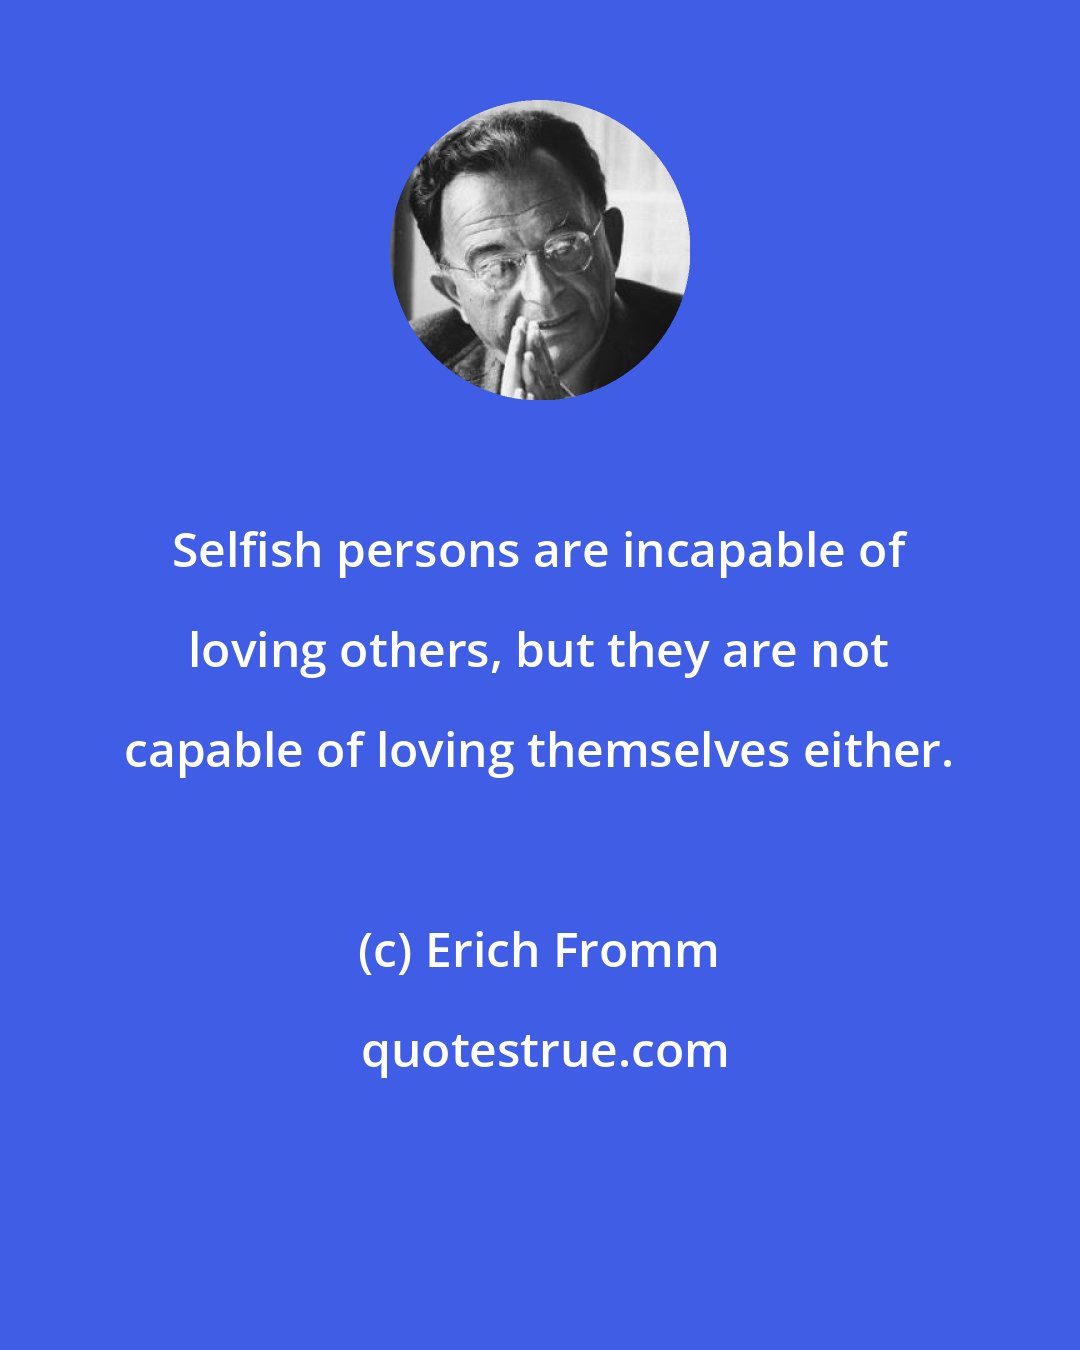 Erich Fromm: Selfish persons are incapable of loving others, but they are not capable of loving themselves either.